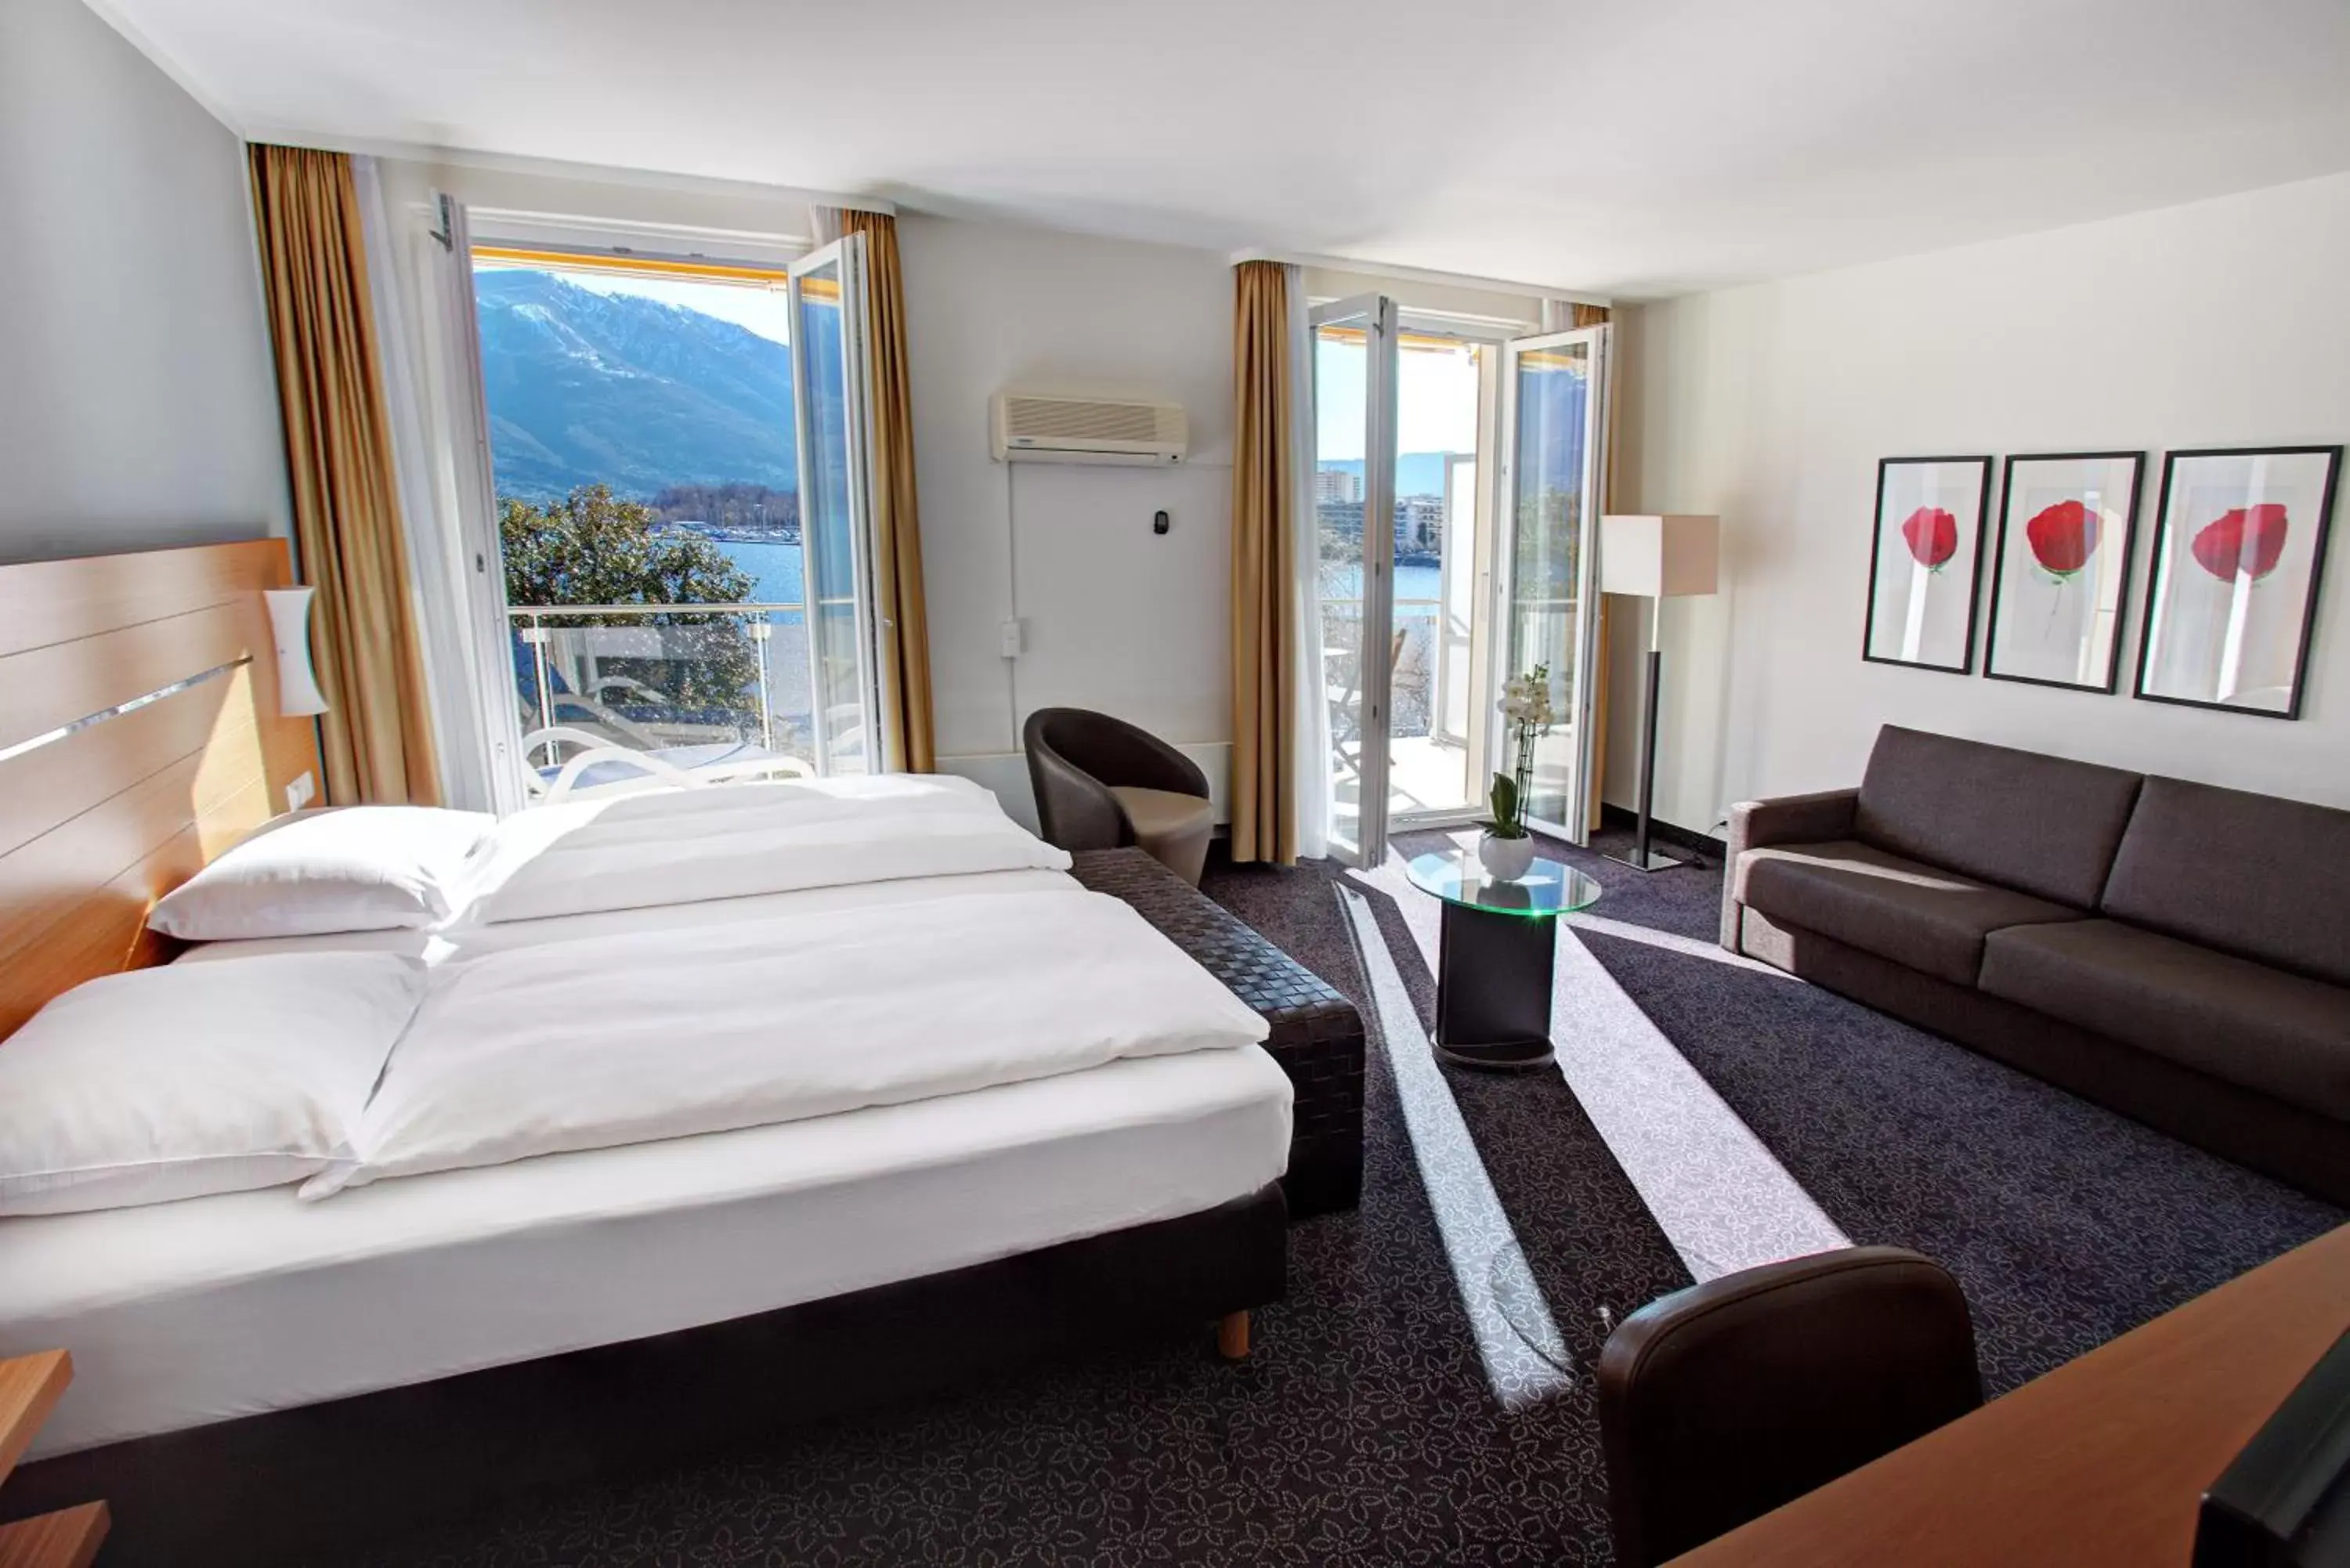 Deluxe Double Room with Lake View in Hotel la Palma au Lac